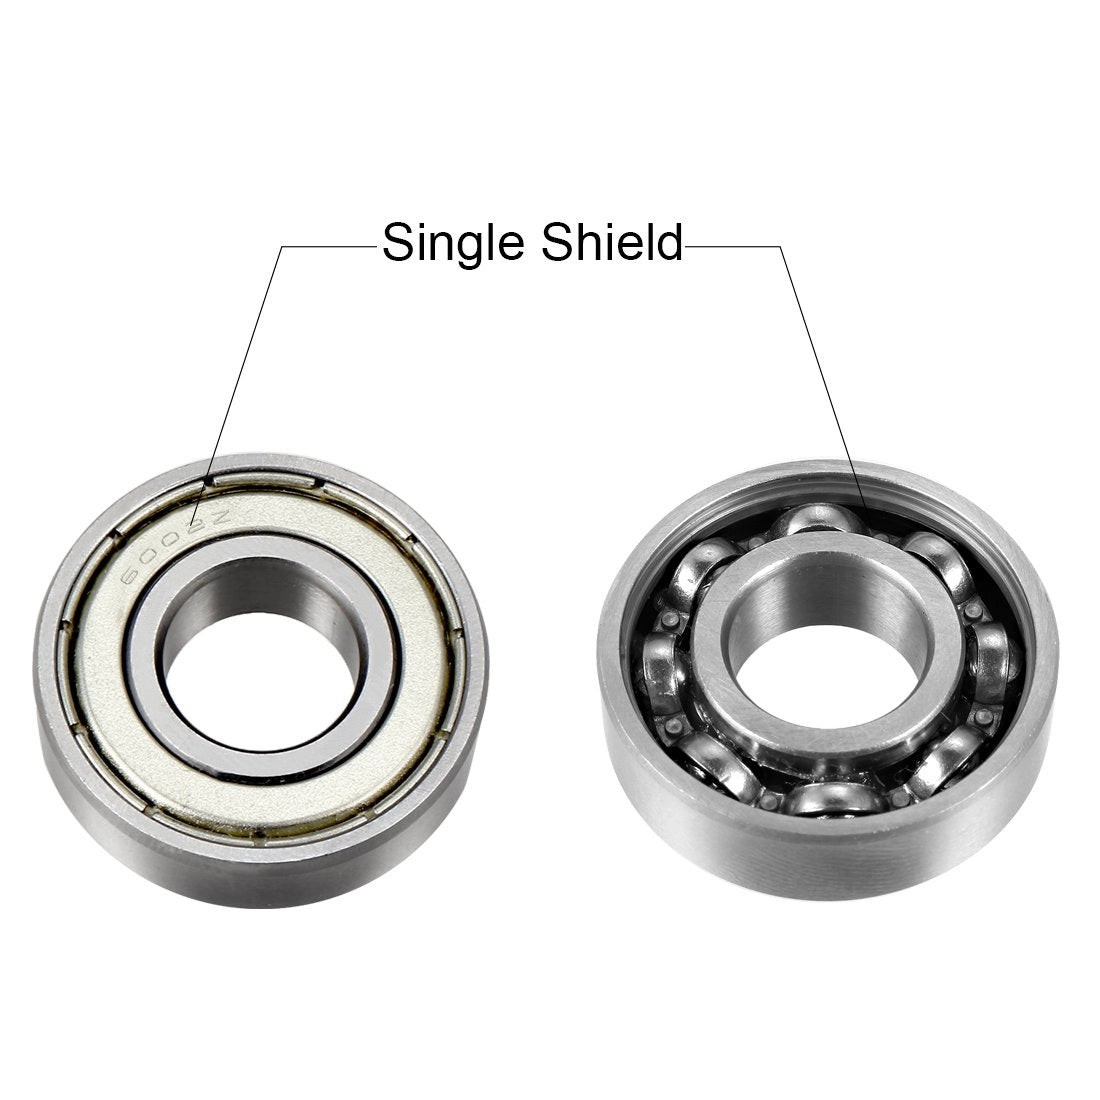 uxcell 6002Z Deep Groove Ball Bearing Single Shield 160102, 15mm x 32mm x 9mm Chrome Steel Bearings (Pack of 5) - 0